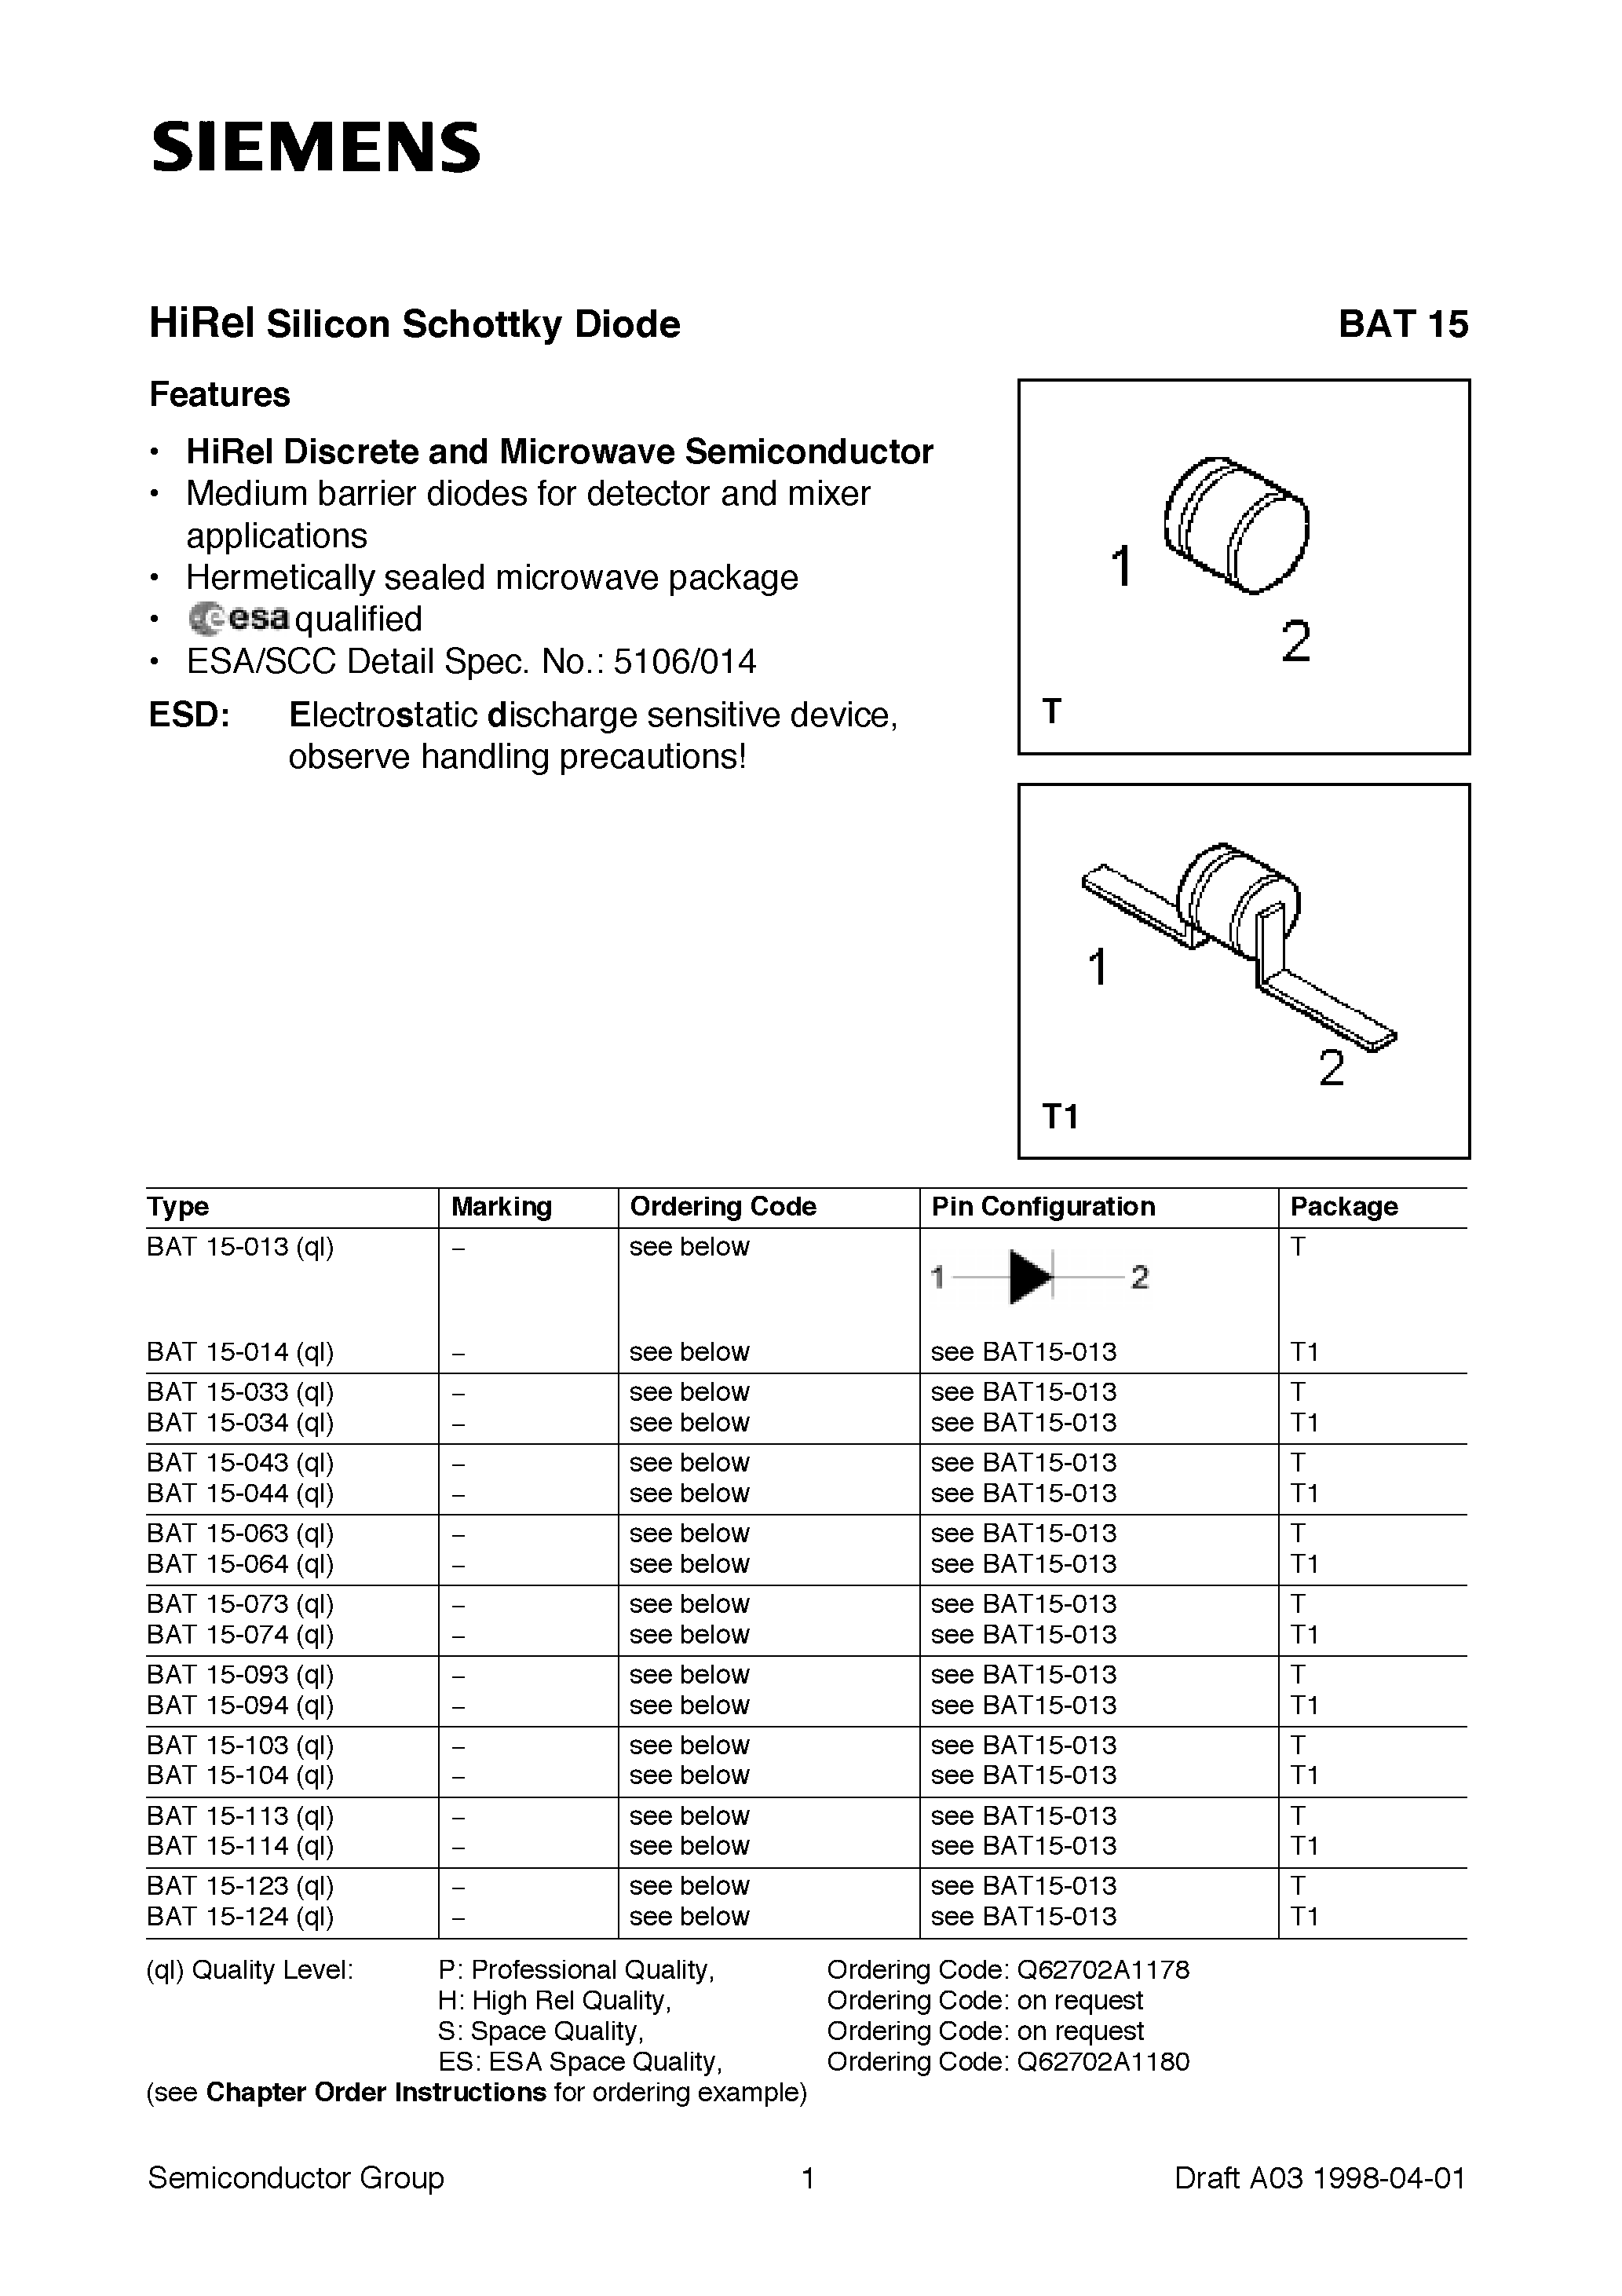 Datasheet BAT15-013 - HiRel Silicon Schottky Diode (HiRel Discrete and Microwave Semiconductor Medium barrier diodes for detector and mixer applications) page 1